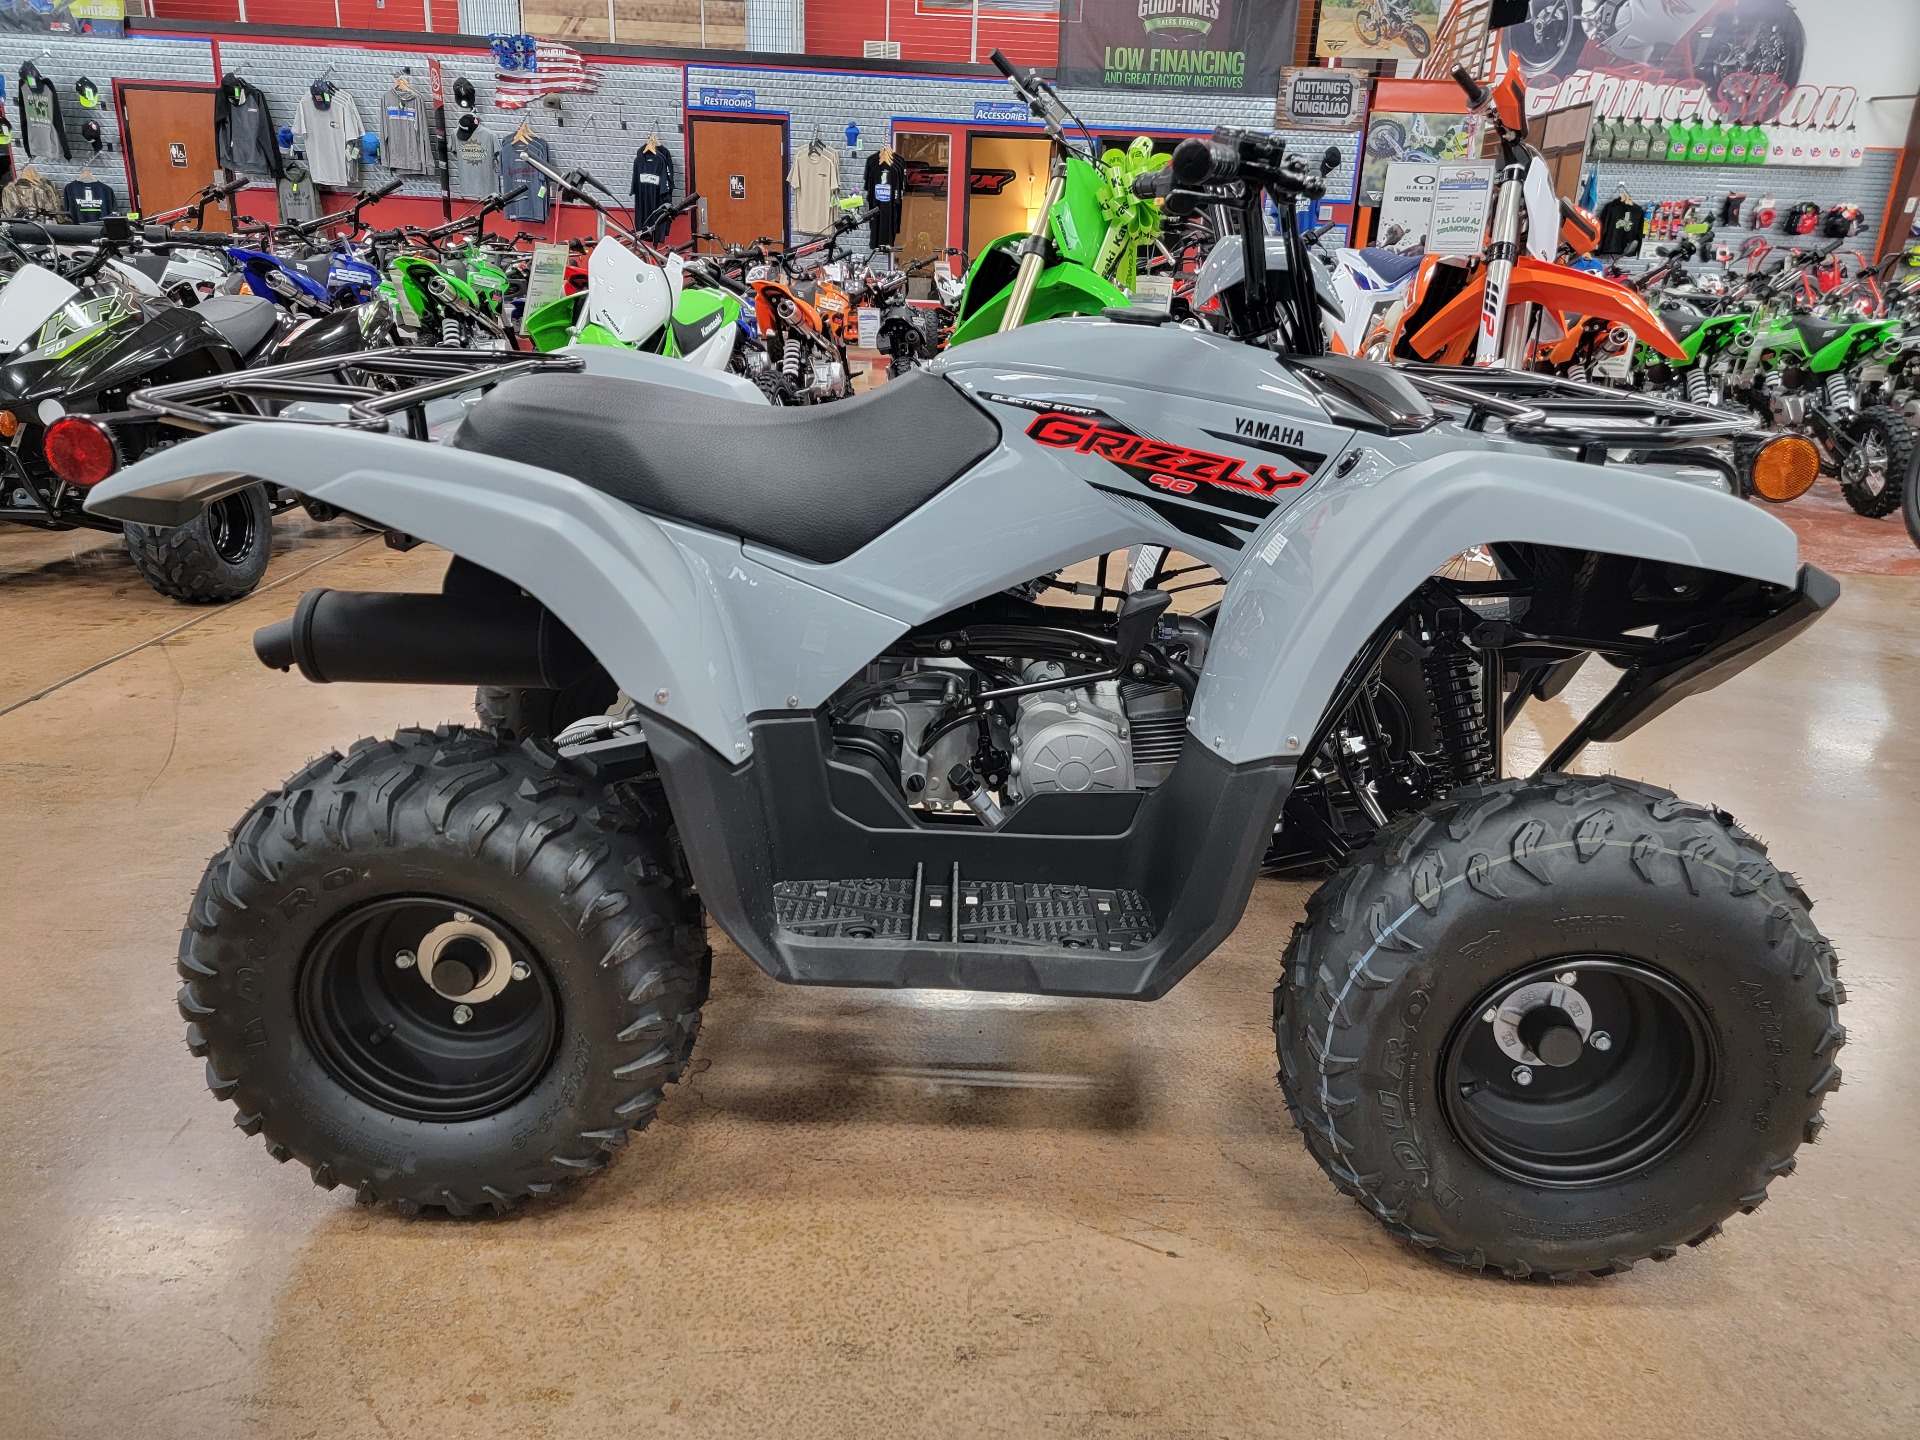 2022 Yamaha Grizzly 90 in Evansville, Indiana - Photo 9